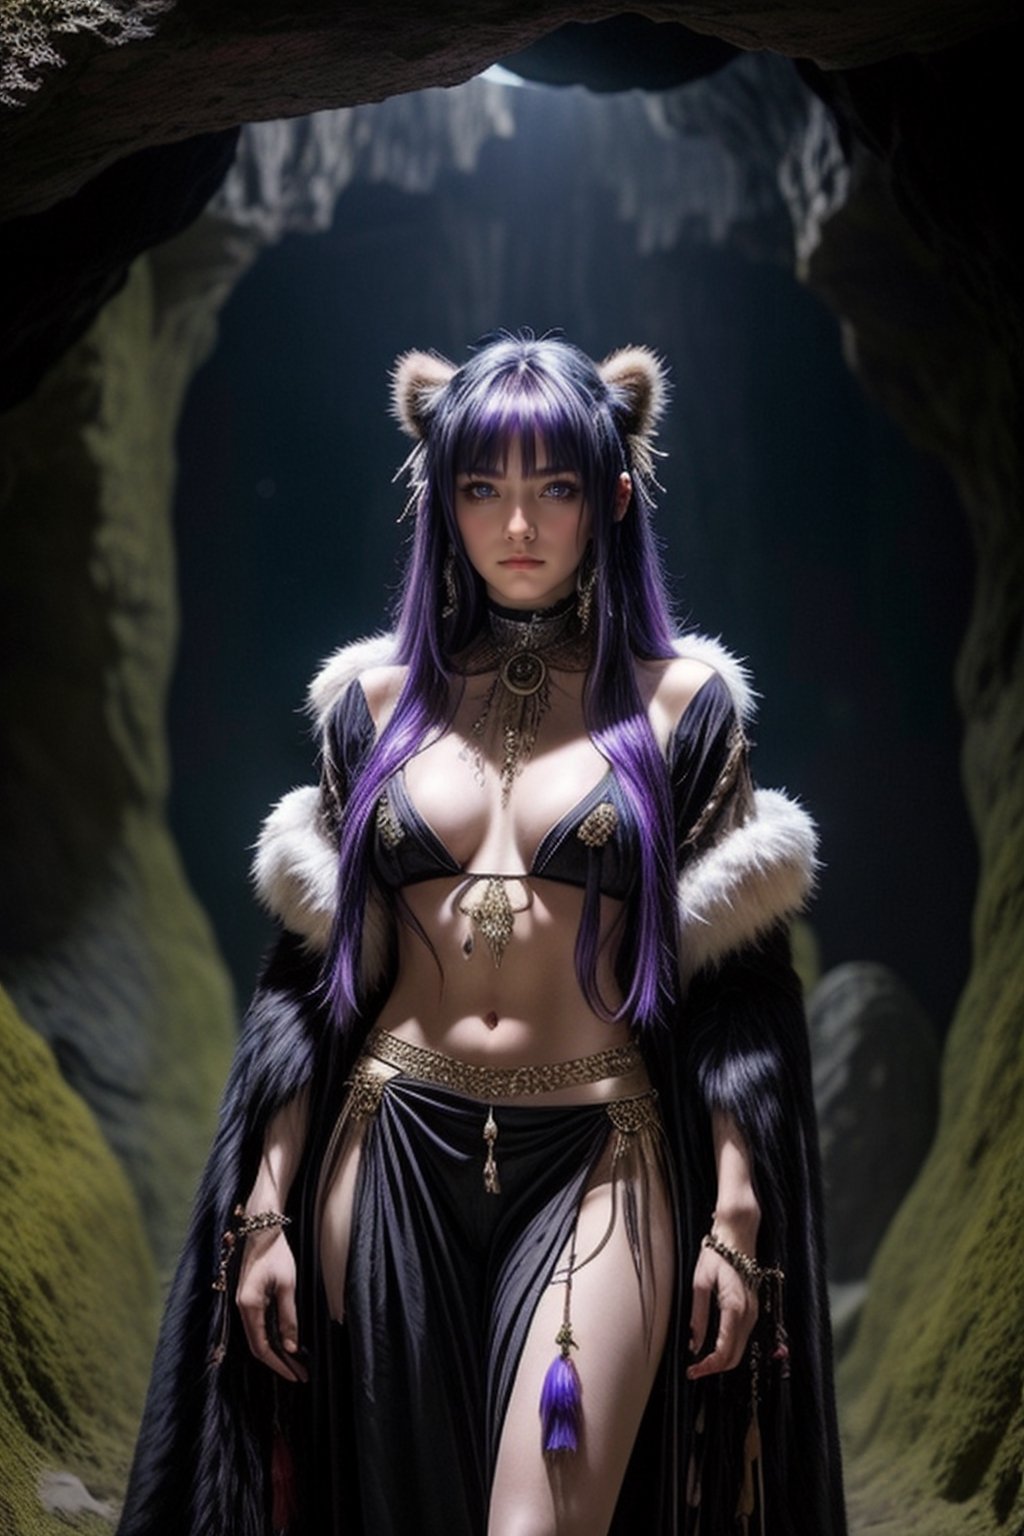 A mesmerizing anime woman with hair the color of midnight, her eyes a haunting shade of lavender. She is attired in a shaman's garb, animal furs and bones dangling from her outfit. She finds herself in a secluded cave, surrounded by mystical totems and shamanic paintings.